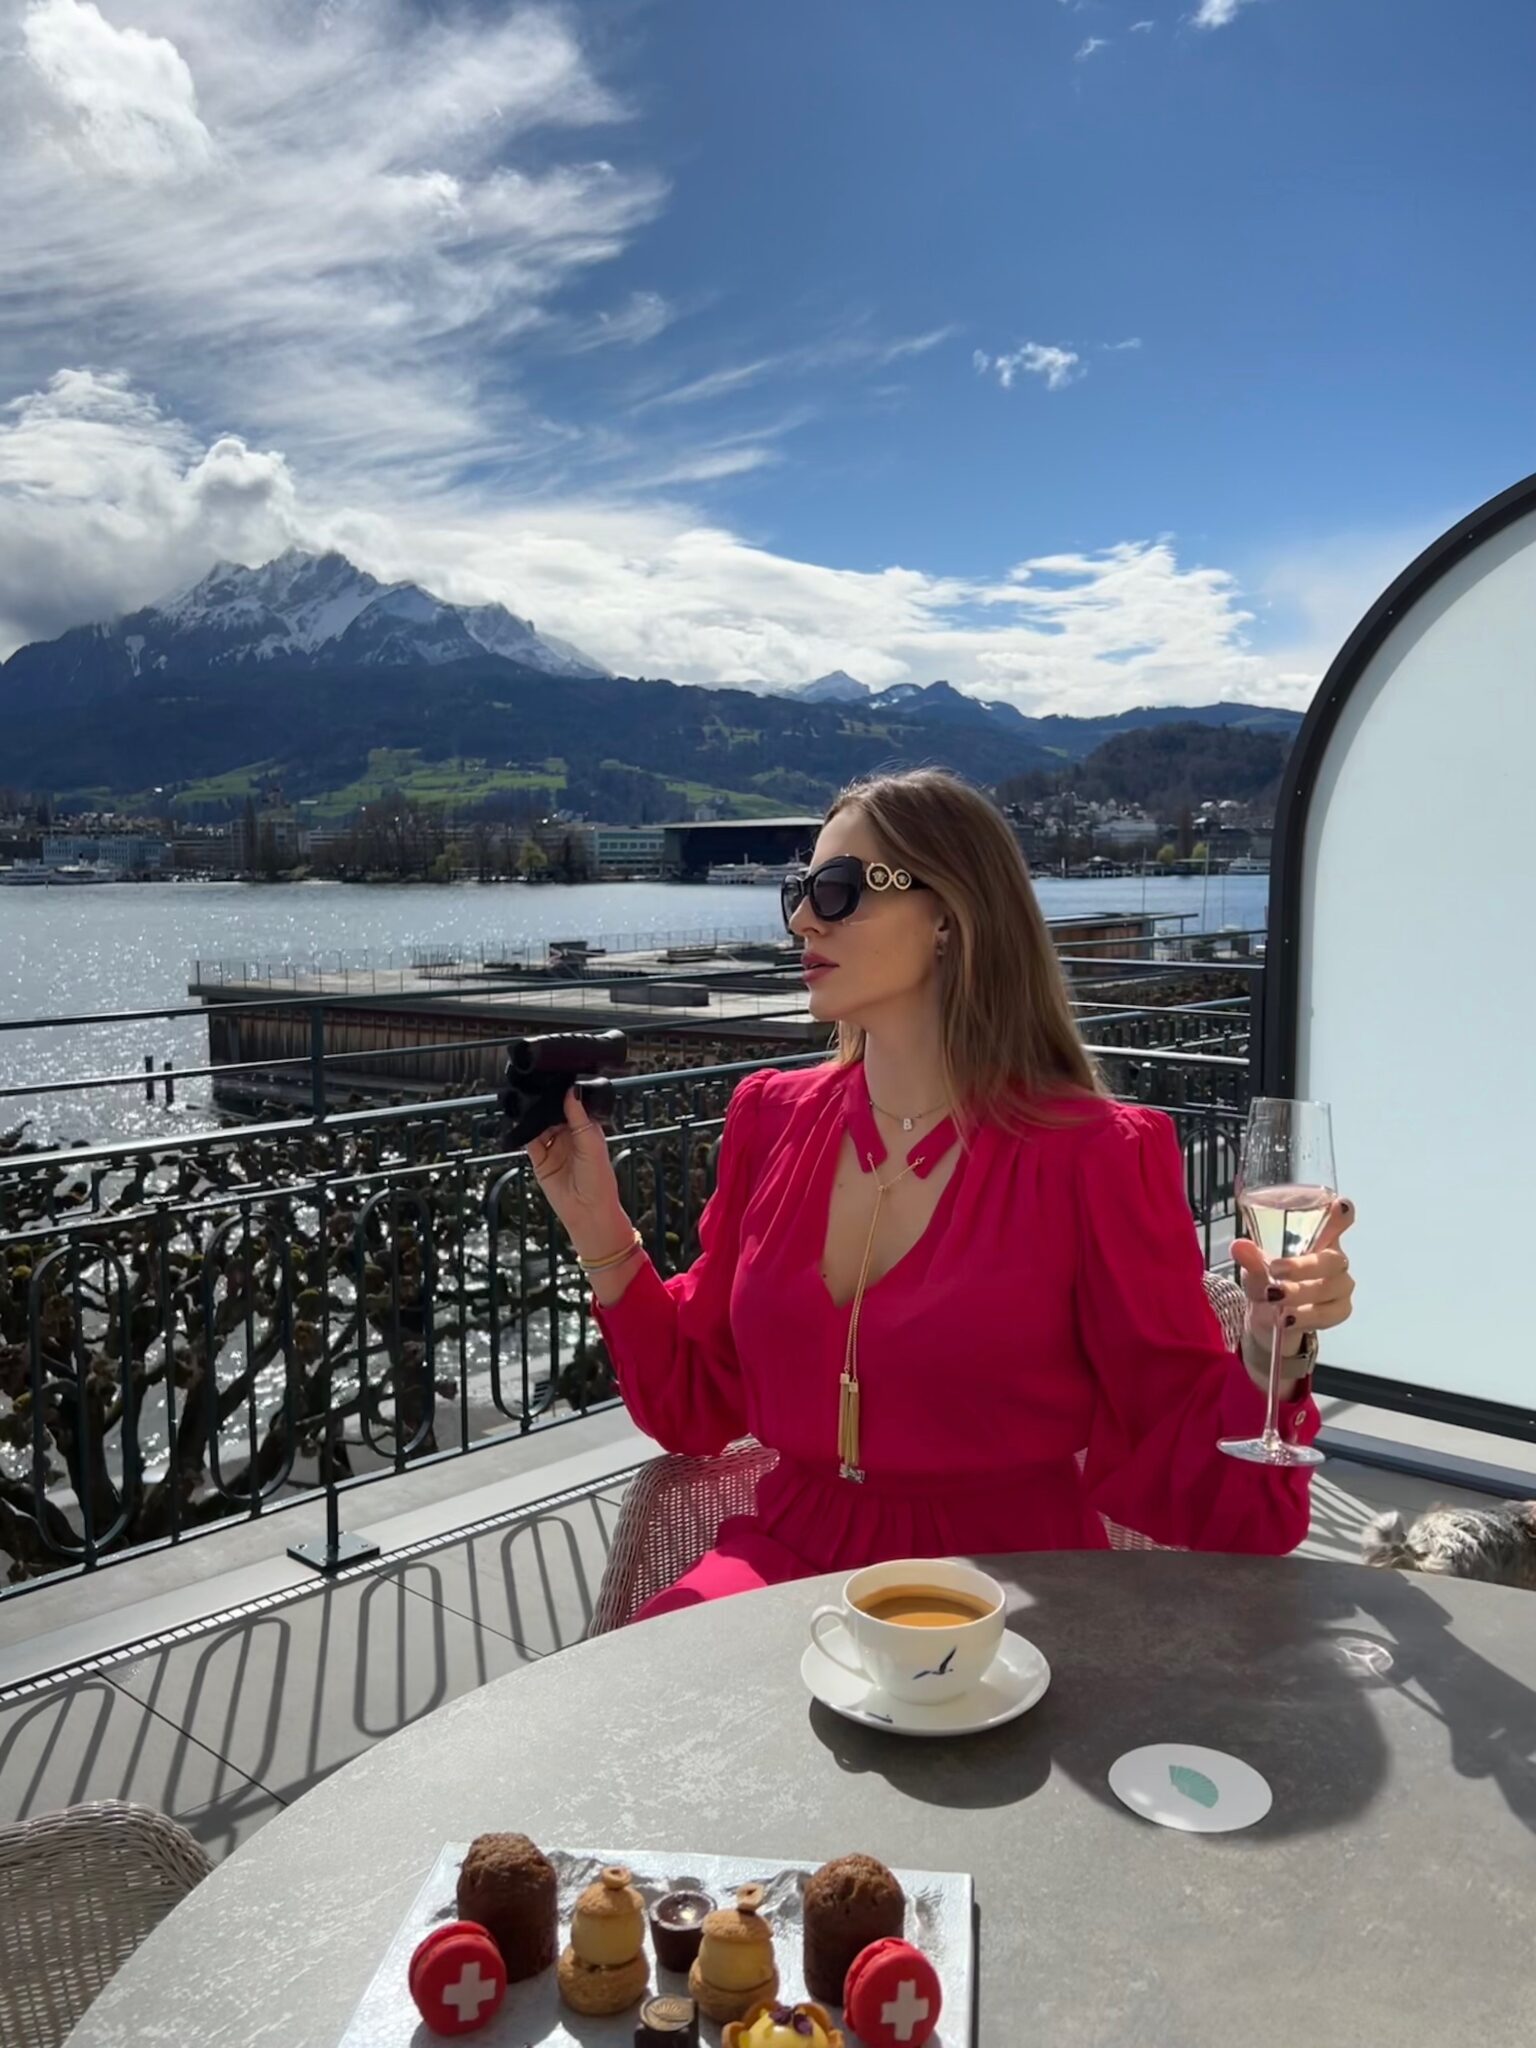 Mandarin Oriental Palace Luzern. A Historic Belle Epoque Palace reopened in 2022. /A magnificent hotel with a panoramic view of Lake Lucerne./